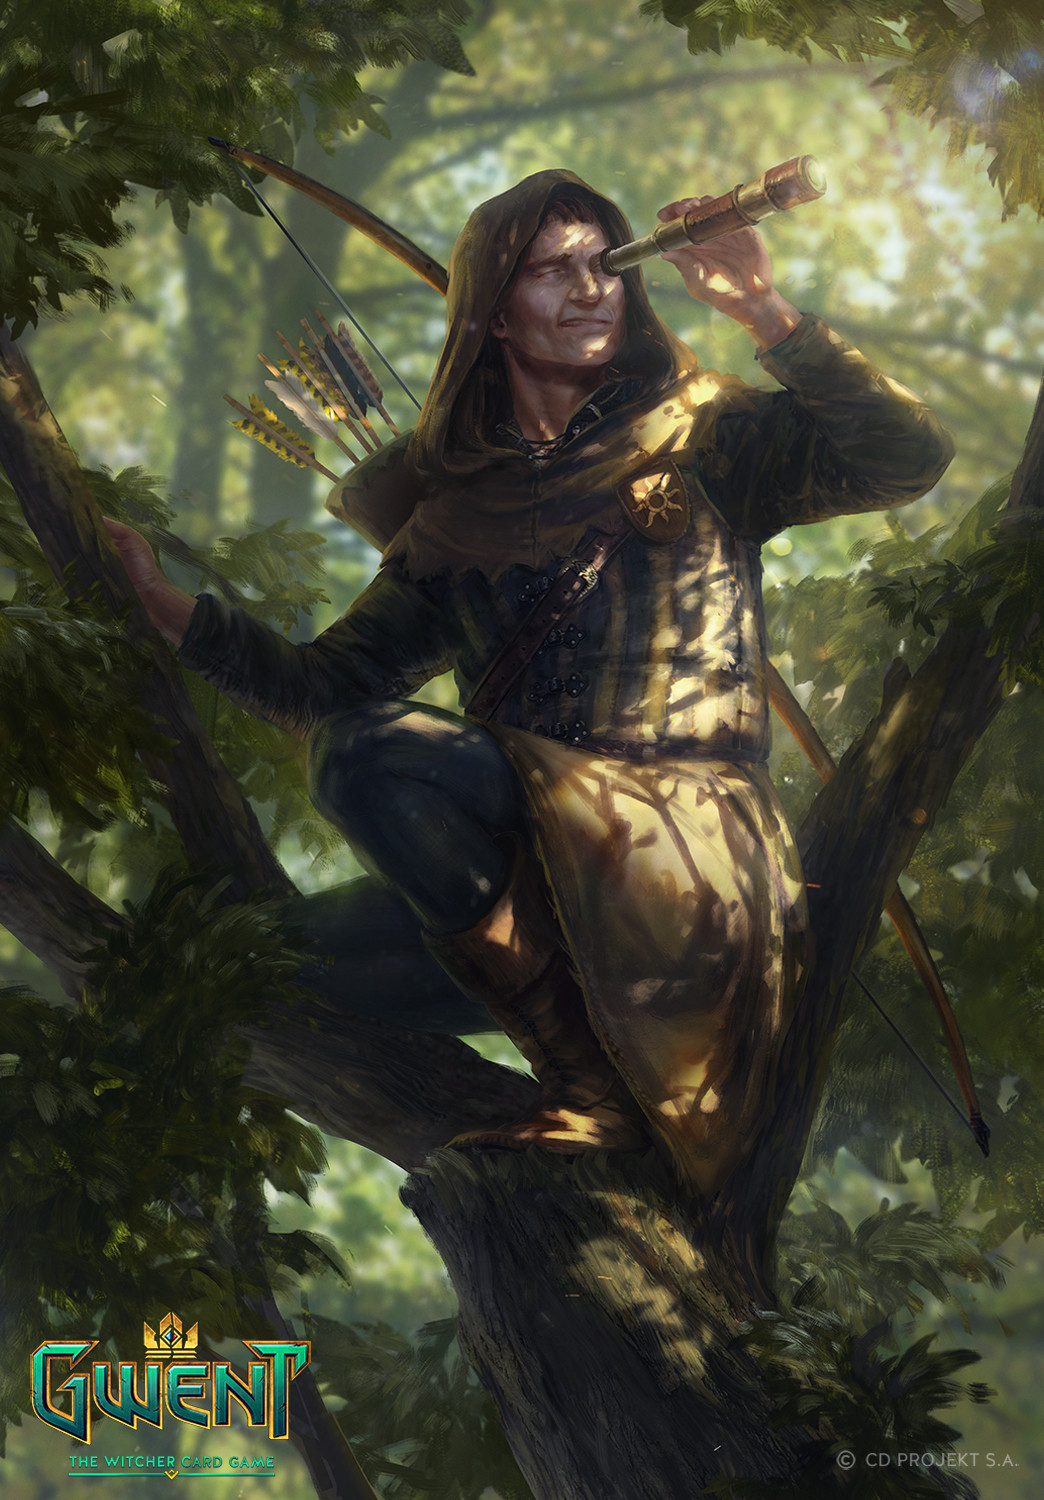 Gwent: The Witcher Card Game Art.